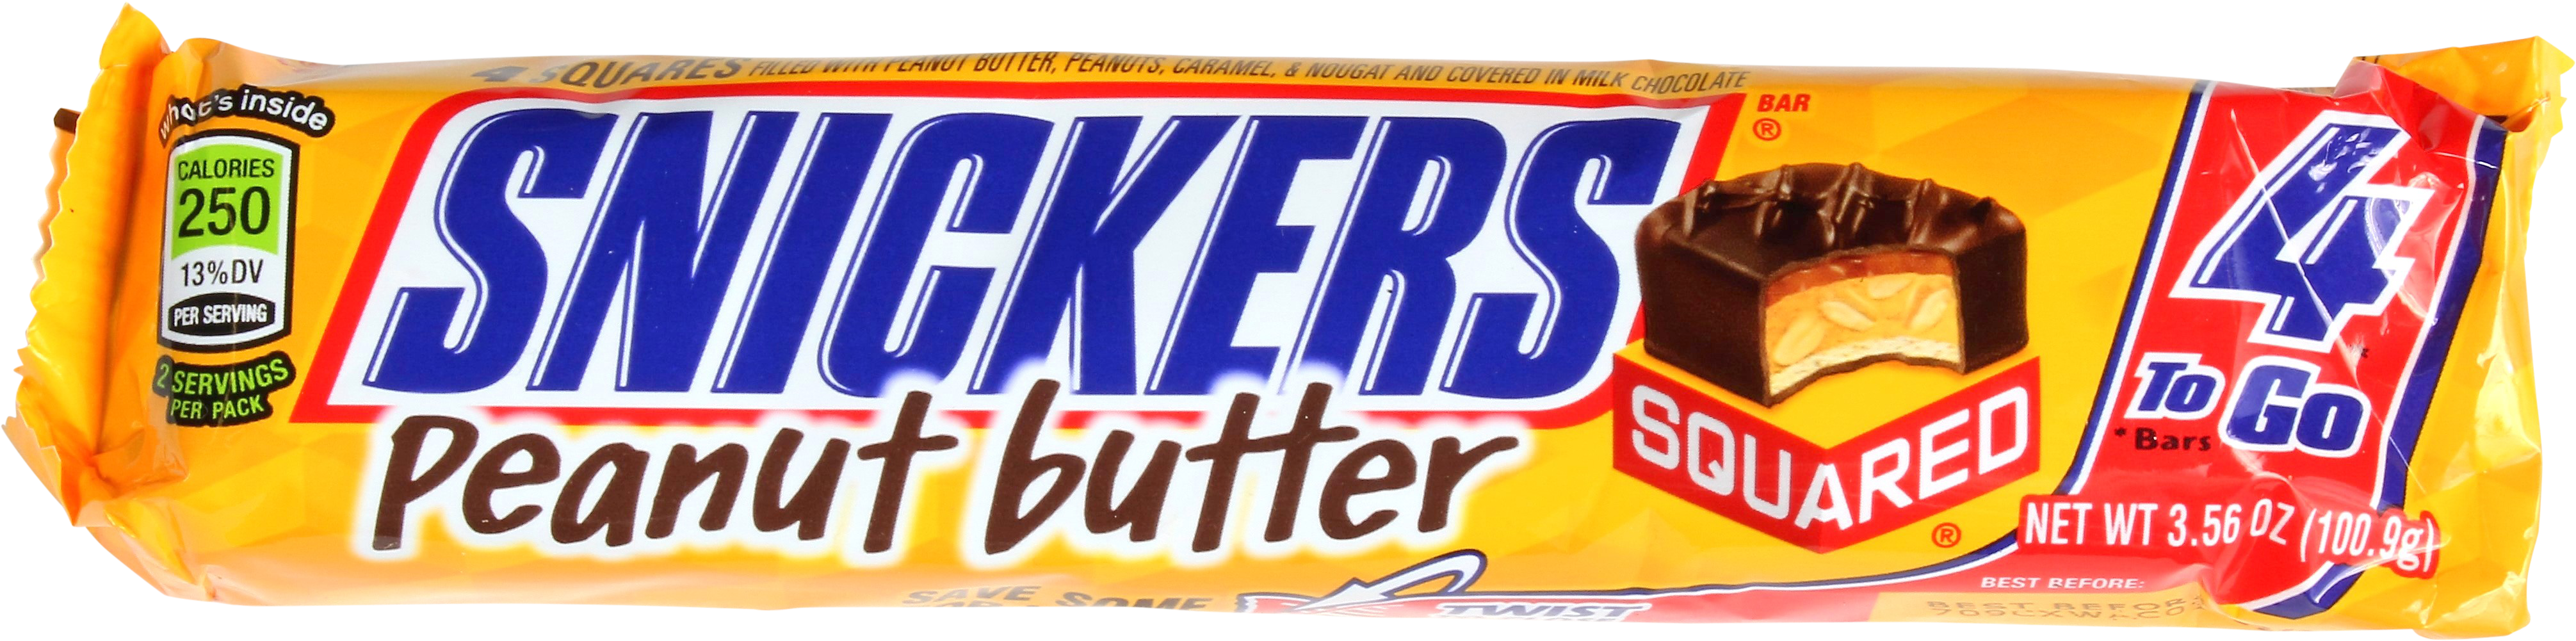 Snickers Peanut Butter Squared Packaging PNG